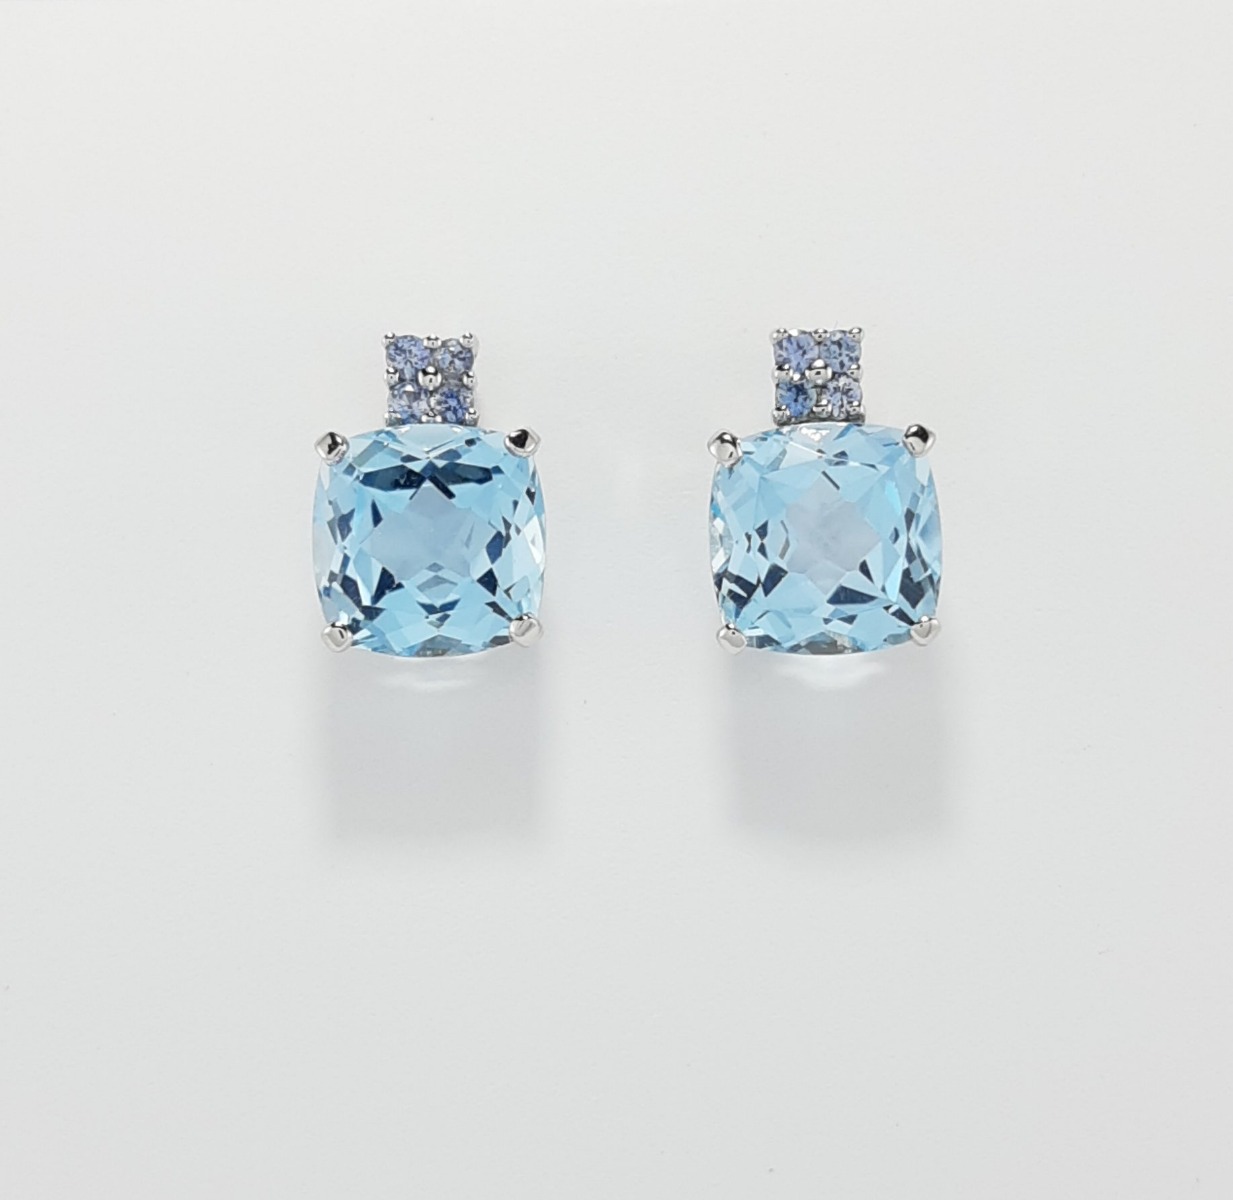 9ct White Gold Blue Topaz and Iolite Earrings-0